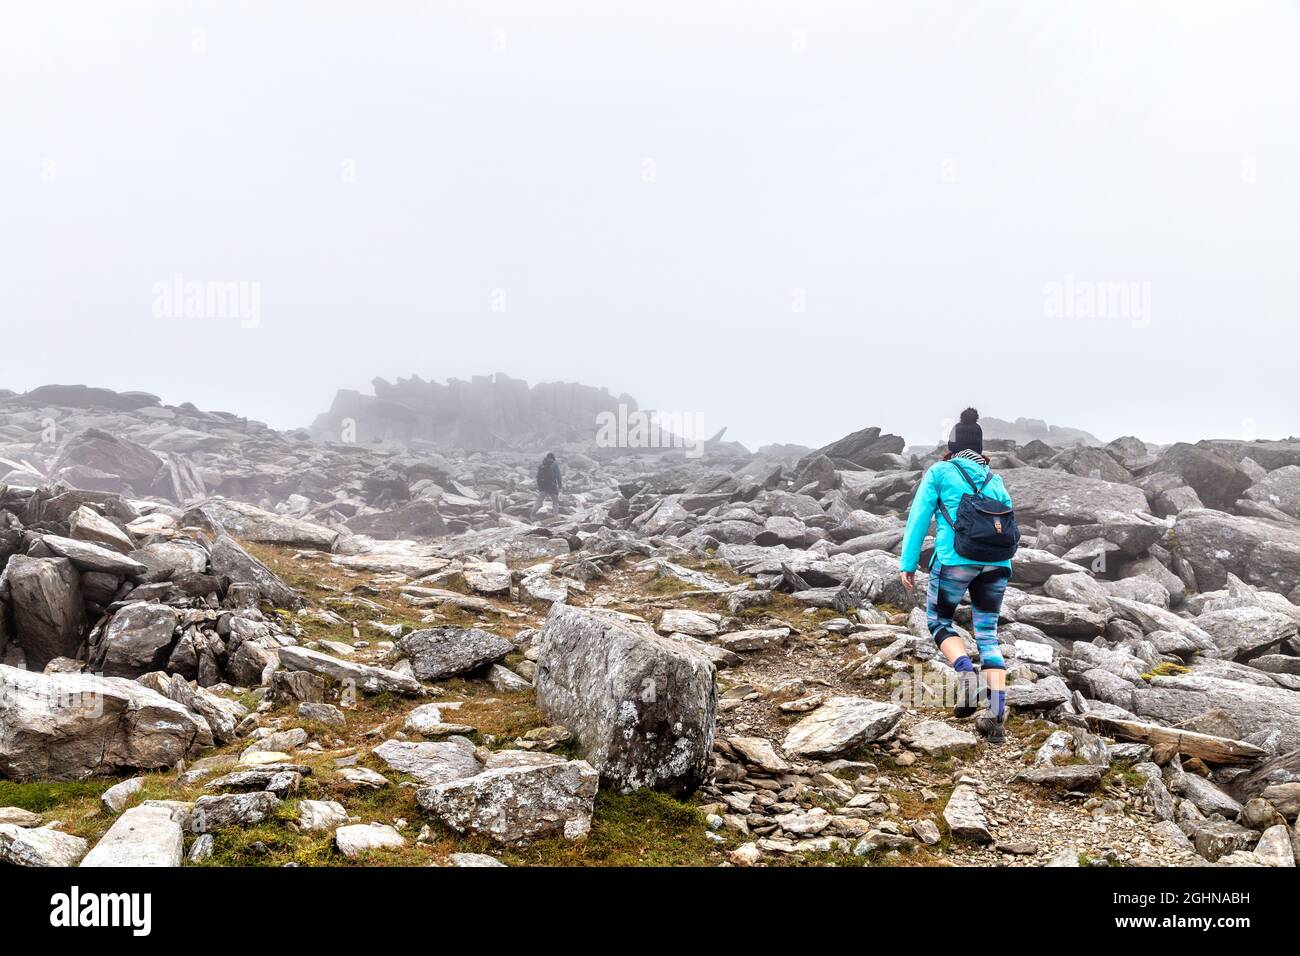 Hikers walking on rocky terrain along the trail to the Glyder Fawr summit, Cwm Idwal, Snowdonia, Wales, UK Stock Photo